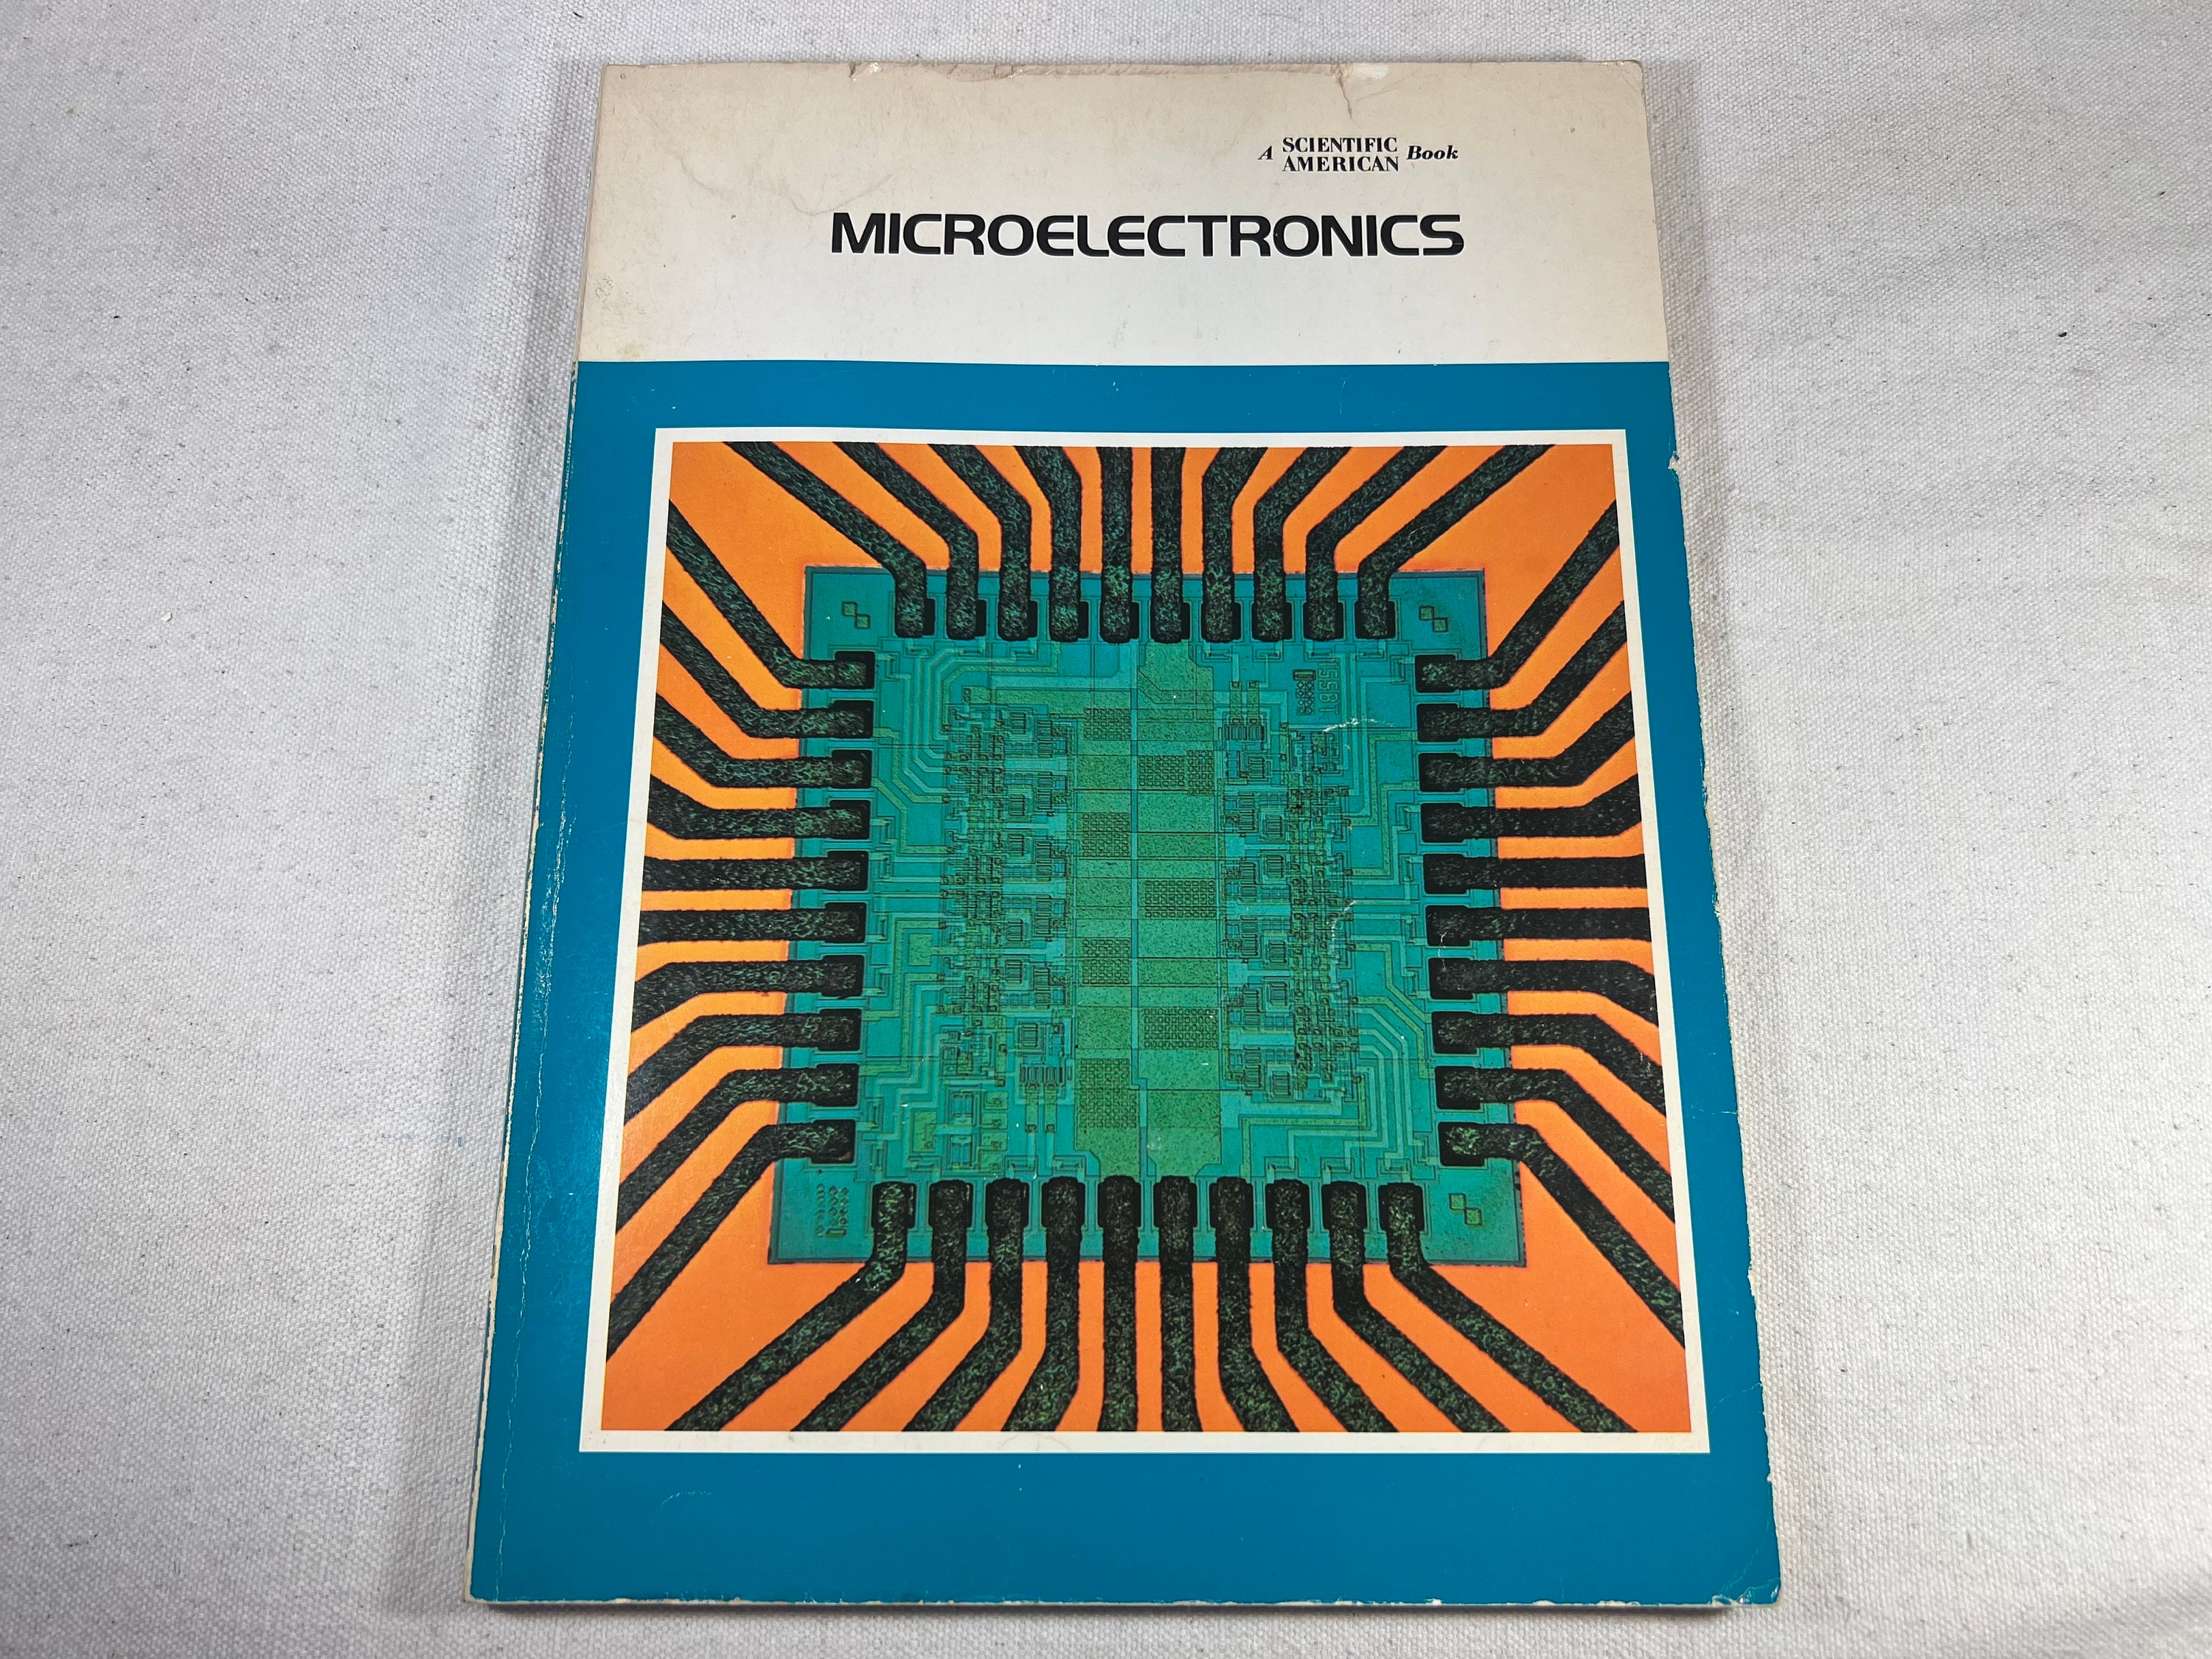 Microelectronics A Scientific American Book Vintage